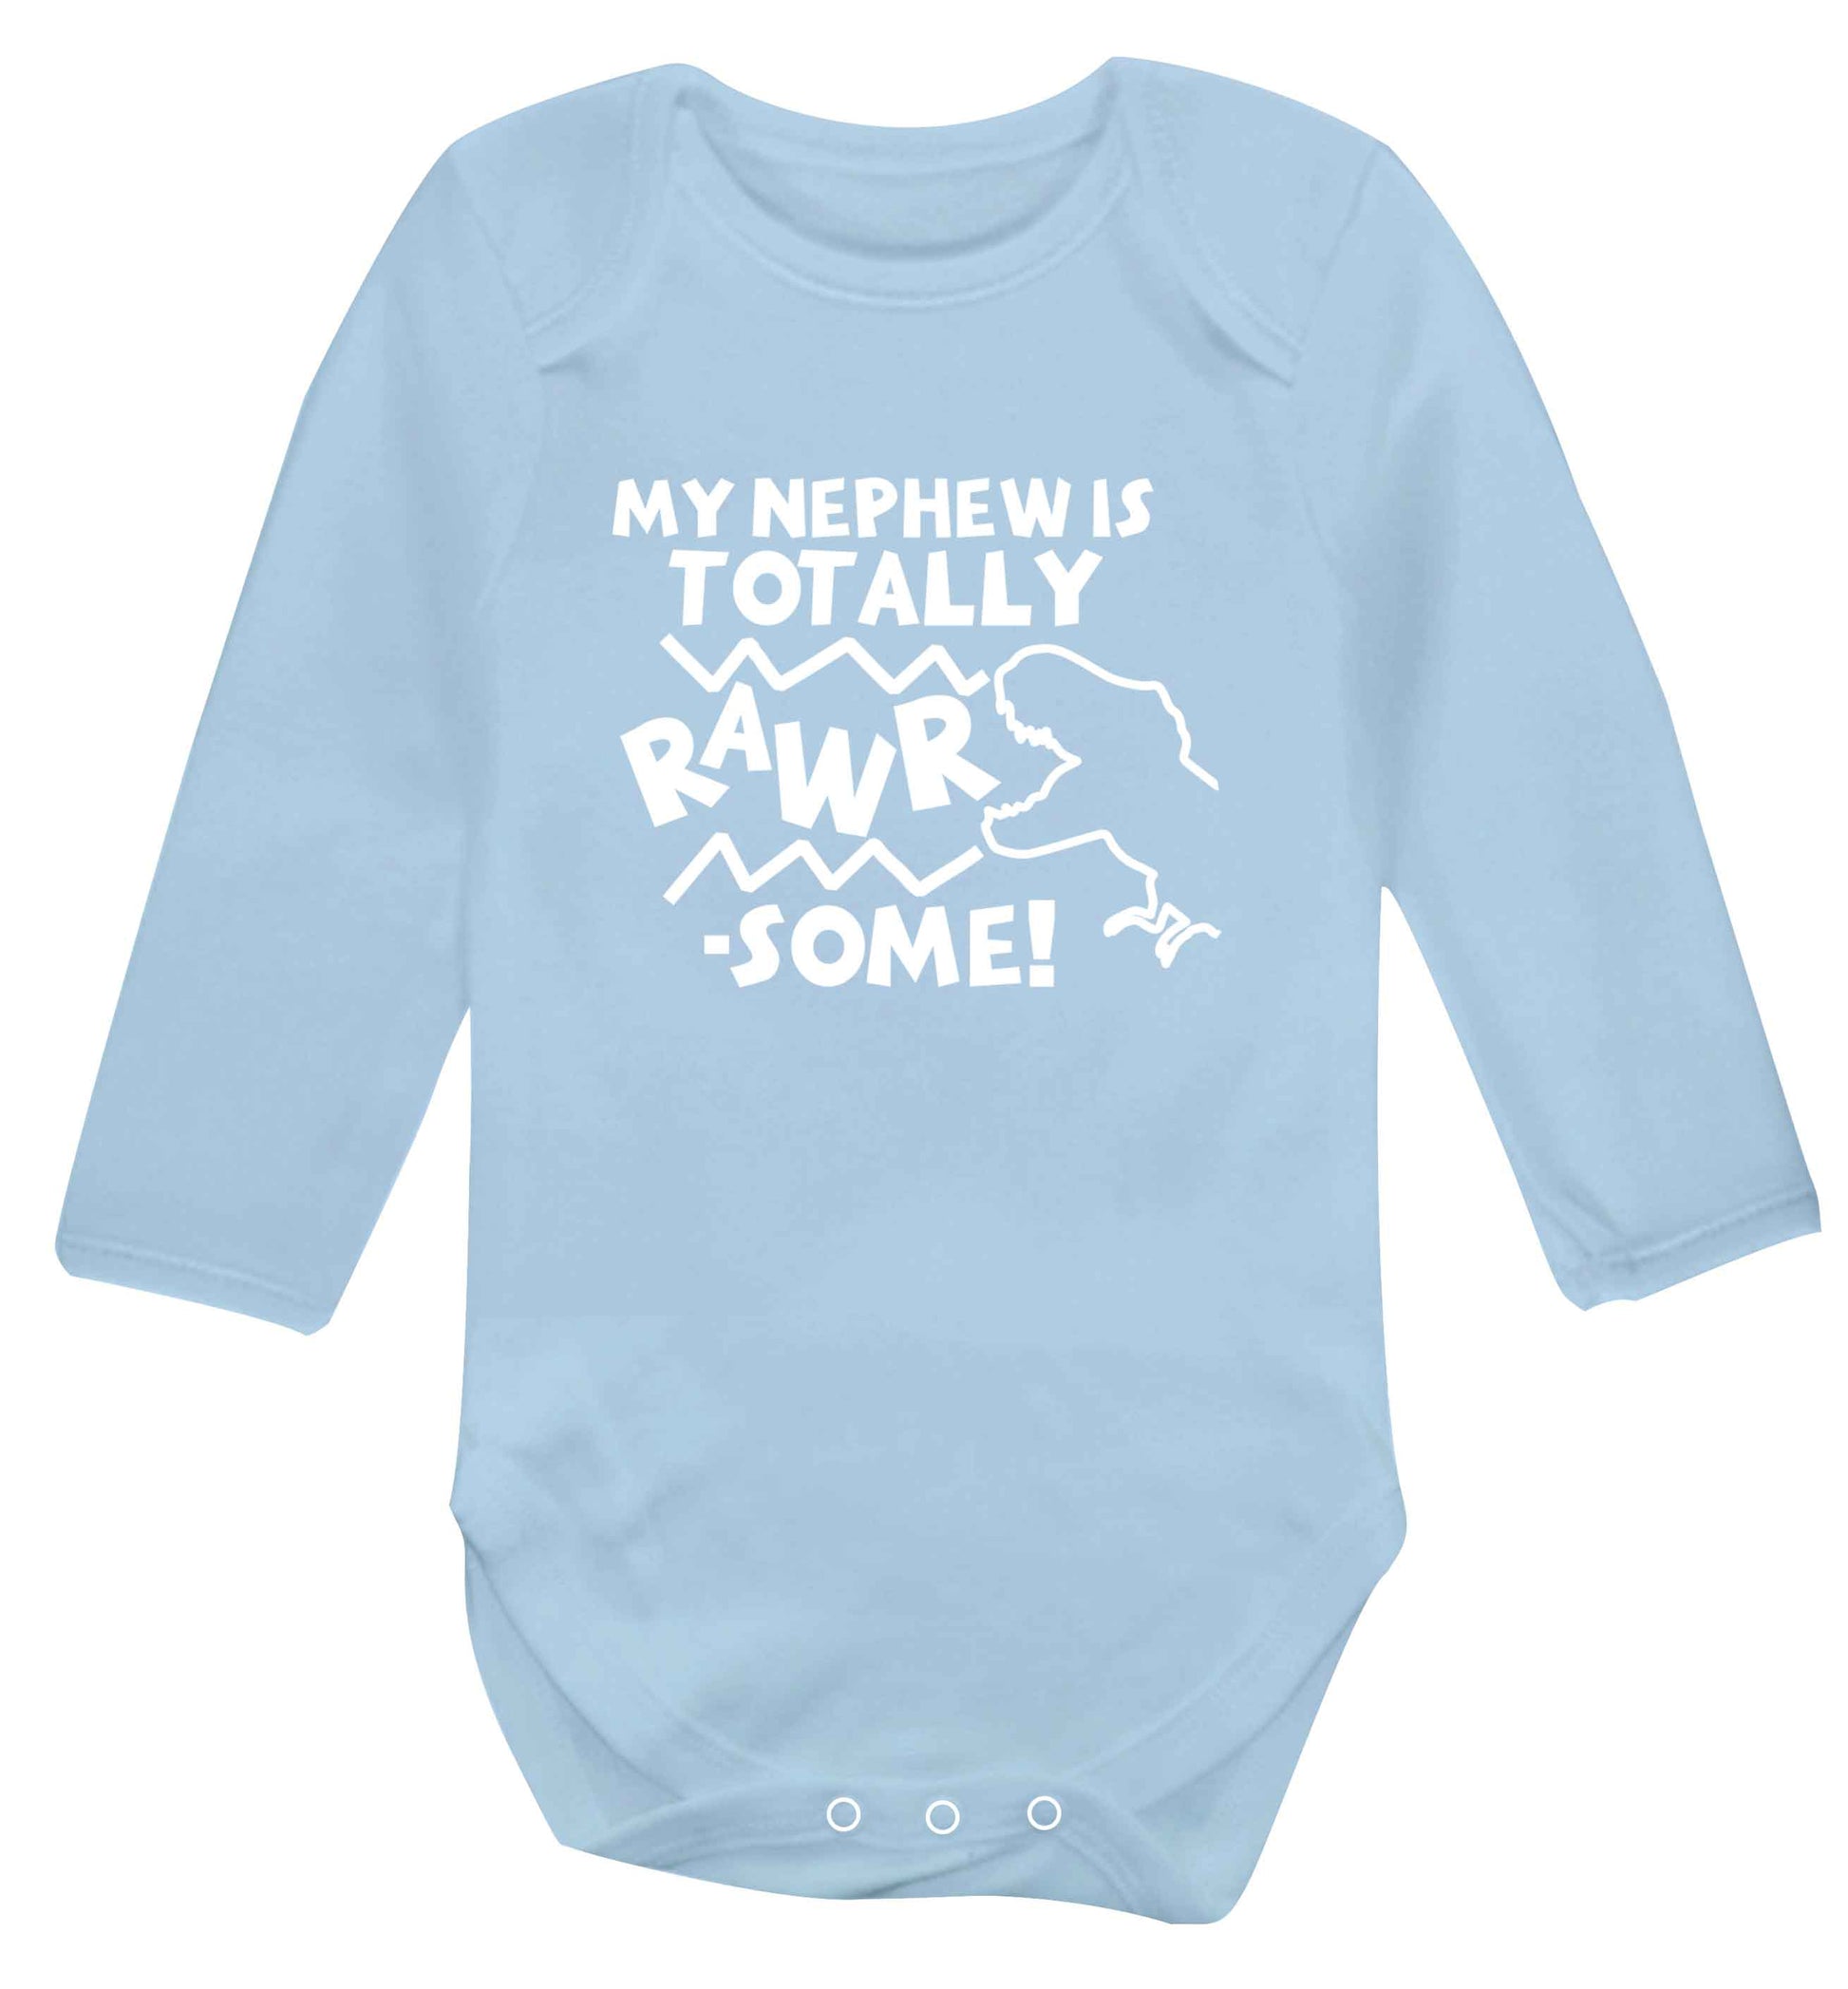 My nephew is totally rawrsome baby vest long sleeved pale blue 6-12 months